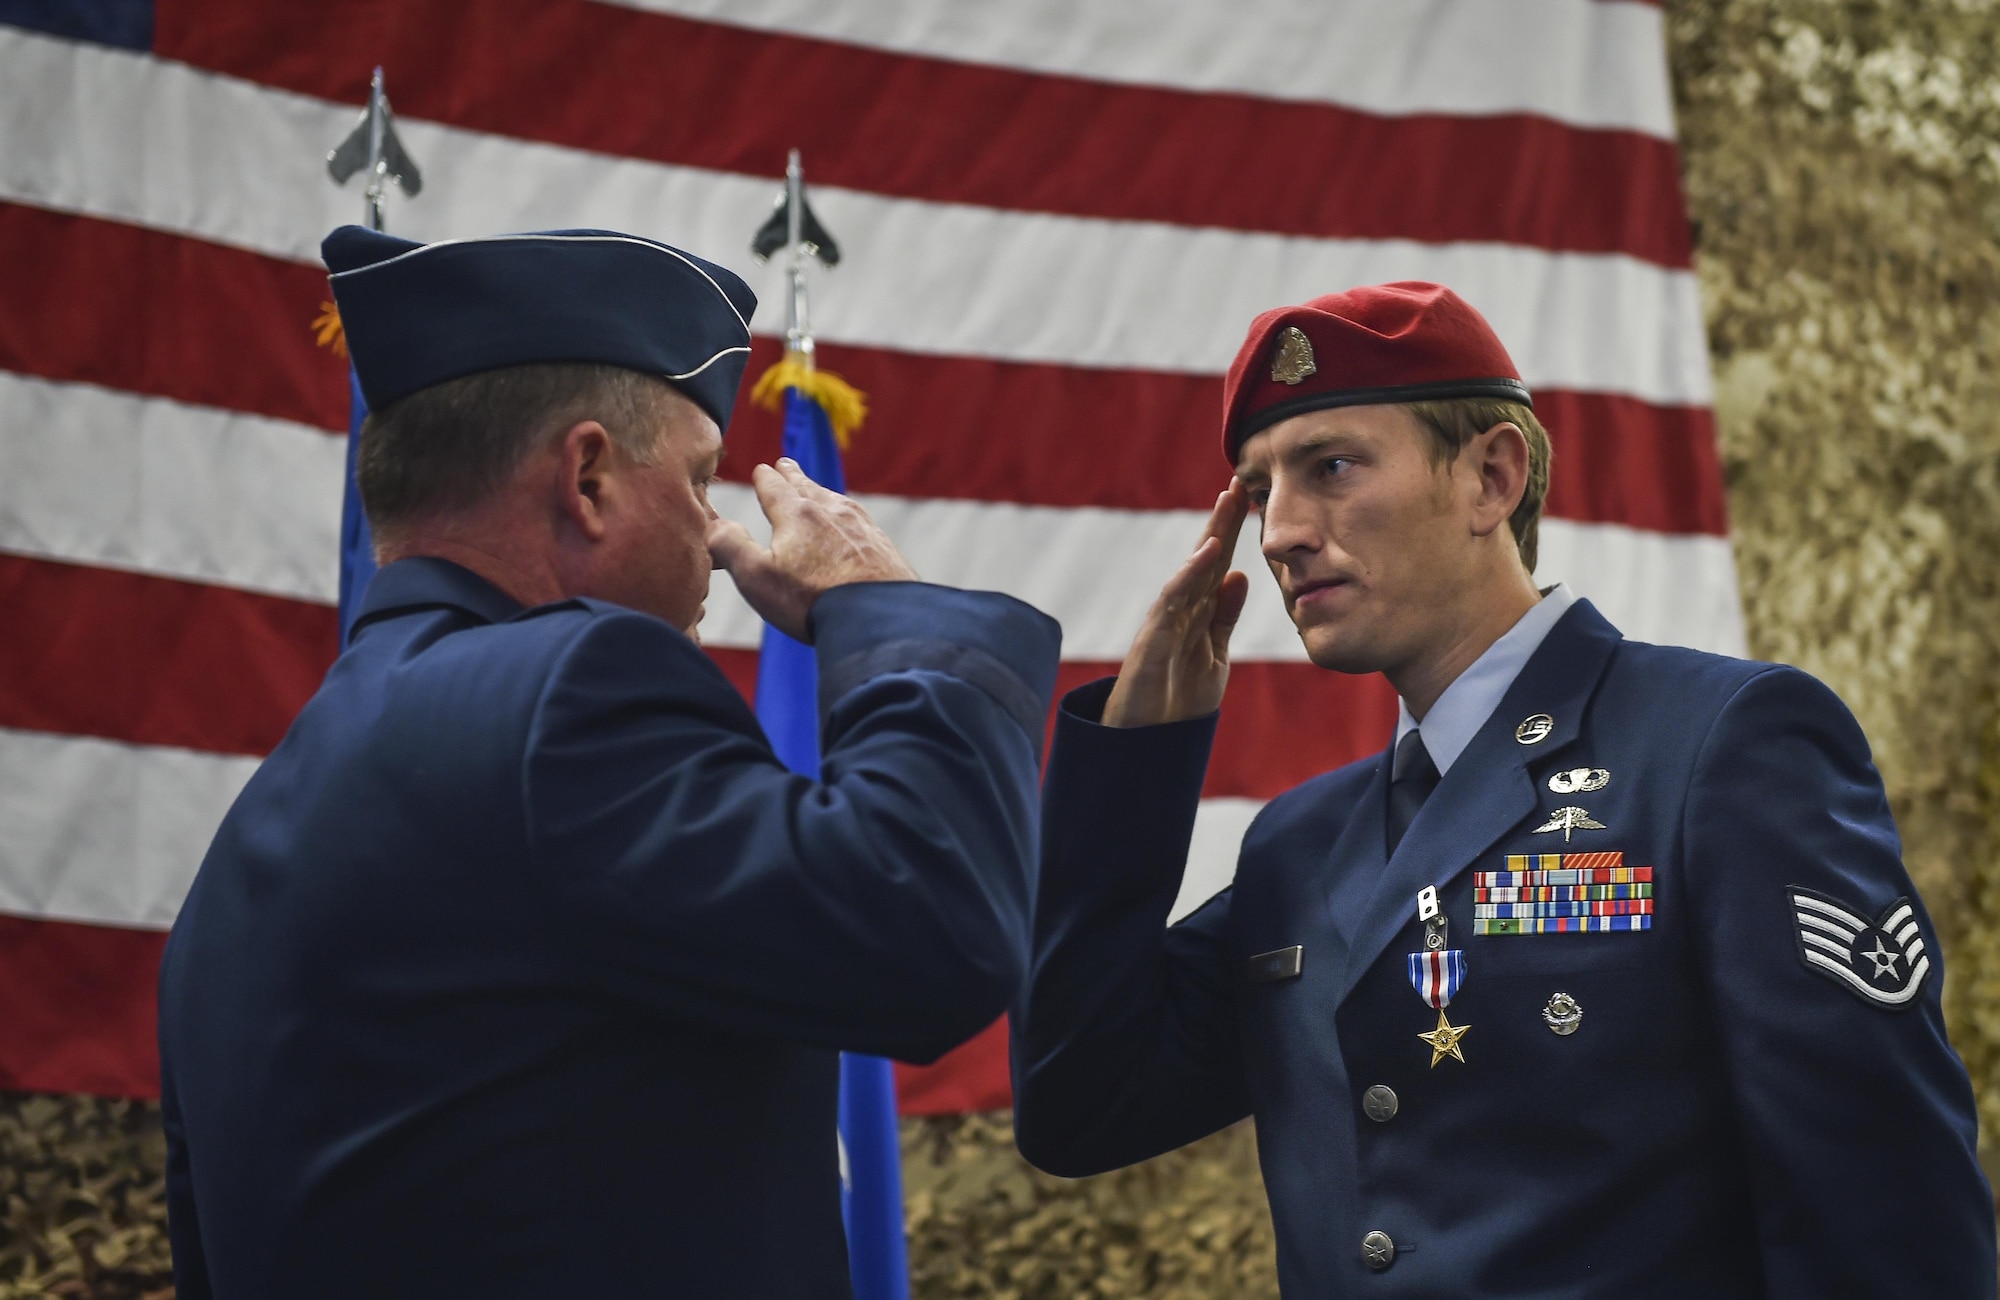 Staff Sgt. Keaton Thiem, a combat controller and Silver Star Medal recipient with the 22nd Special Tactics Squadron,  salutes Maj. Gen. Eugene Haase, vice commander of Air Force Special Operations Command, during a Silver Star Medal presentation ceremony at Joint Base Lewis-McChord, Wash., Nov. 16, 2016. Thiem used air power to ensure the safety of his 100-plus man SOF element during a 14-hour firefight with no regard for his own personal safety, while deployed with U.S. Army Special Operations Forces in Afghanistan. (U.S. Air Force photo by Senior Airman Ryan Conroy) 